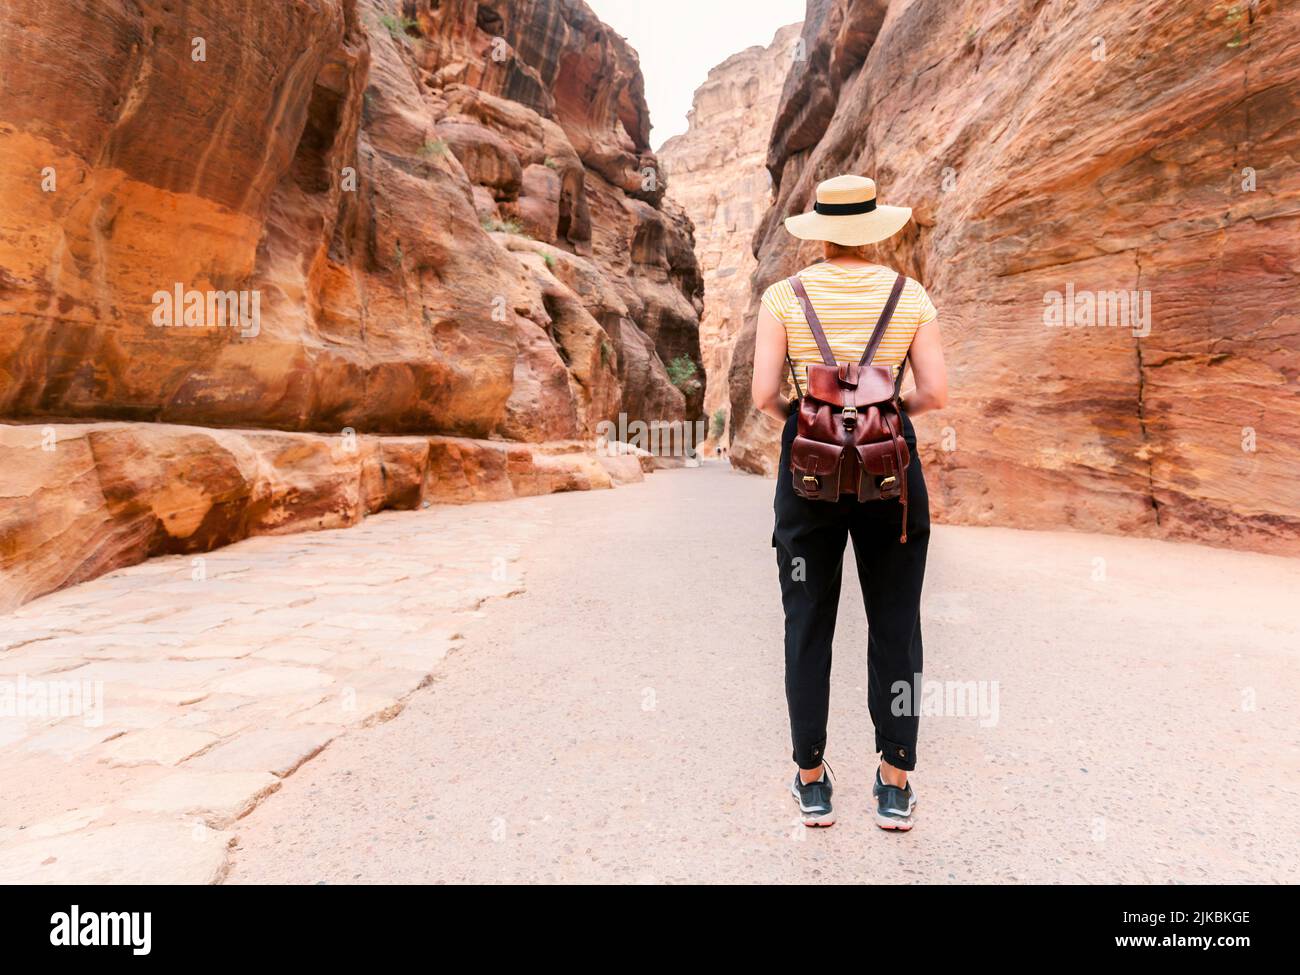 Petra, Jordan - Tourist with hat in Siq gorge in Petra historic and archaeological city in southern Jordan Stock Photo